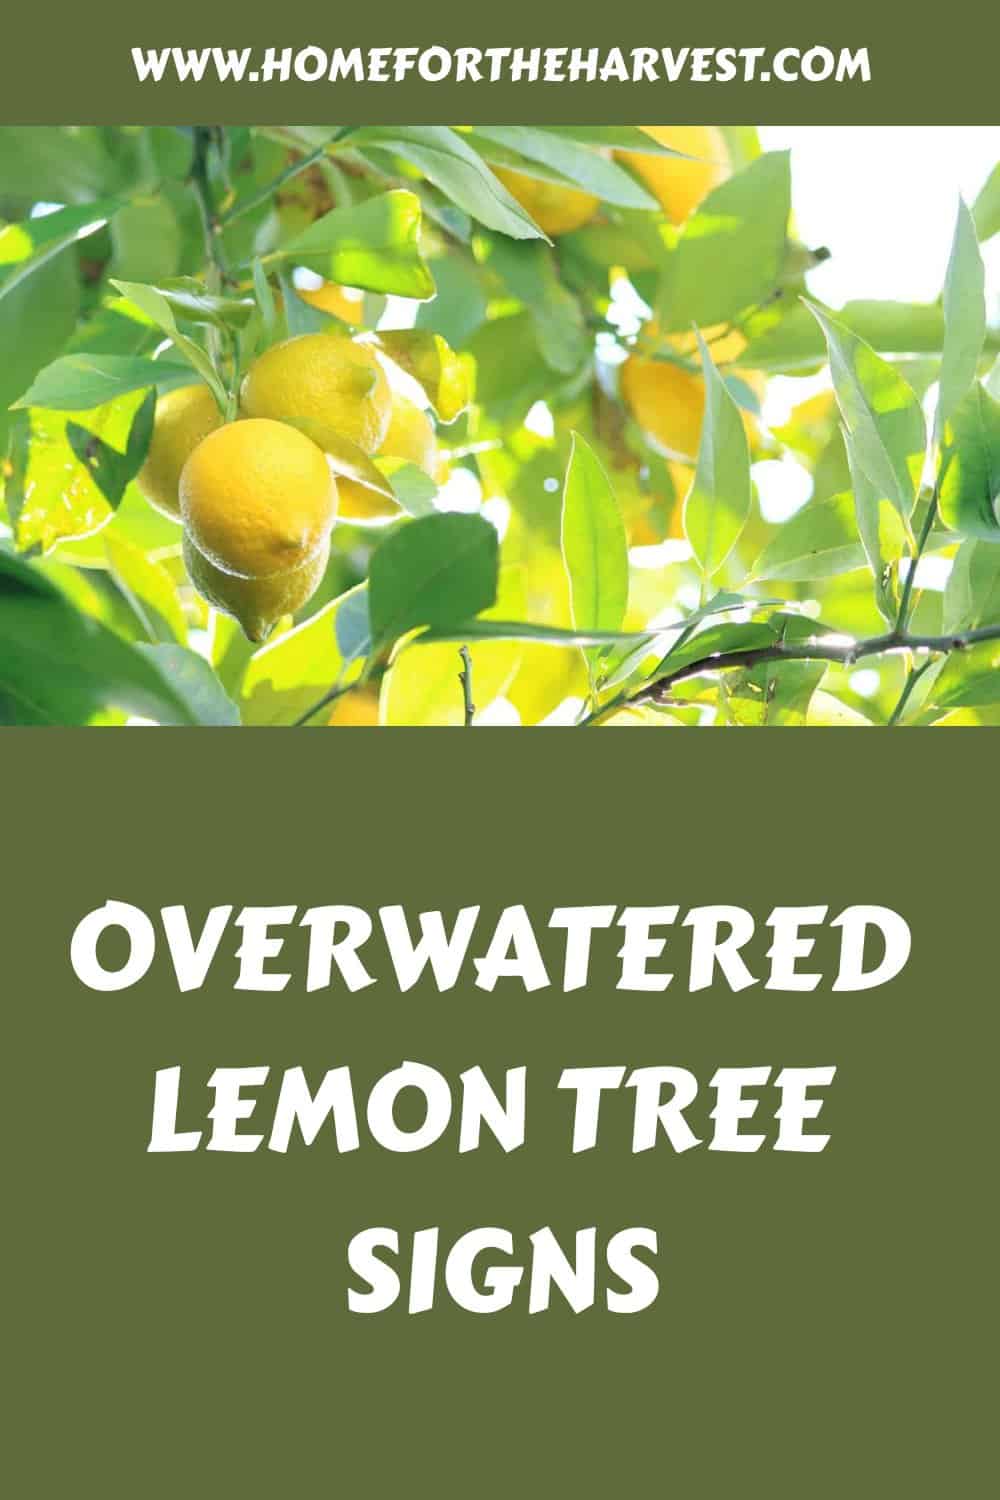 Overwatered lemon tree signs generated pin 45444